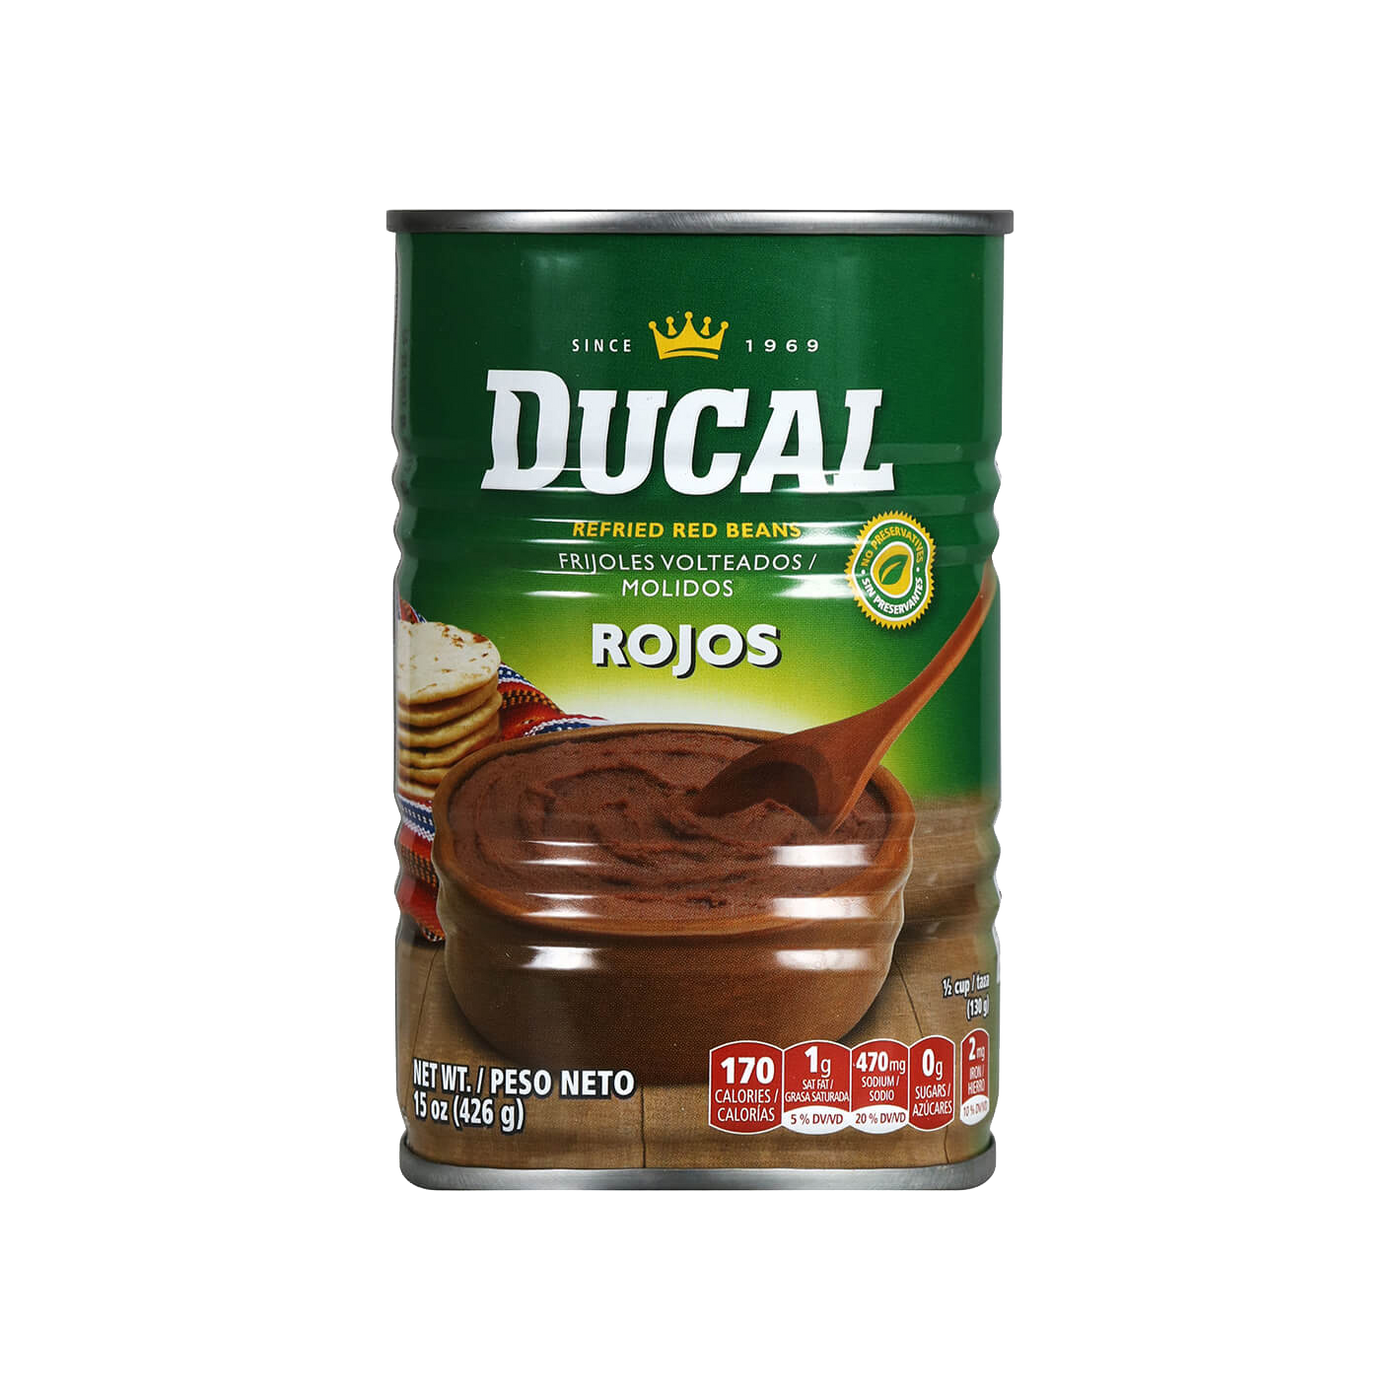   Ducal Refried Red Beans